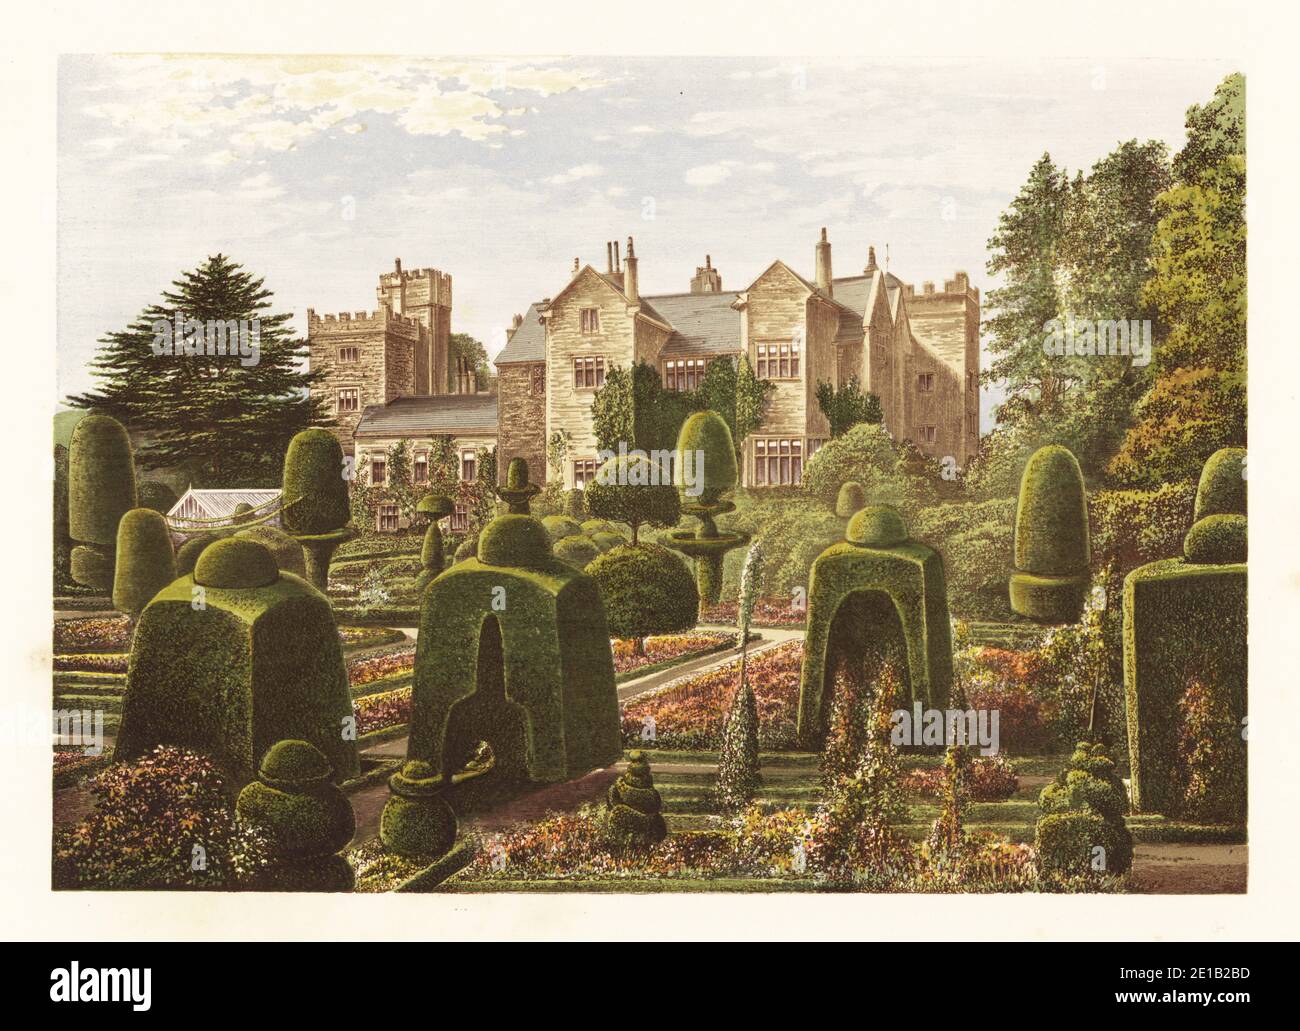 Levens Hall., Cumbria, England. Elizabethan-era house with famous topiary garden laid out by French gardener Guillaume Beaumont in the 17th century. Colour woodblock by Benjamin Fawcett in the Baxter process of an illustration by Alexander Francis Lydon from Reverend Francis Orpen Morris’s Picturesque Views of the Seats of Noblemen and Gentlemen of Great Britain and Ireland, William Mackenzie, London, 1880. Stock Photo